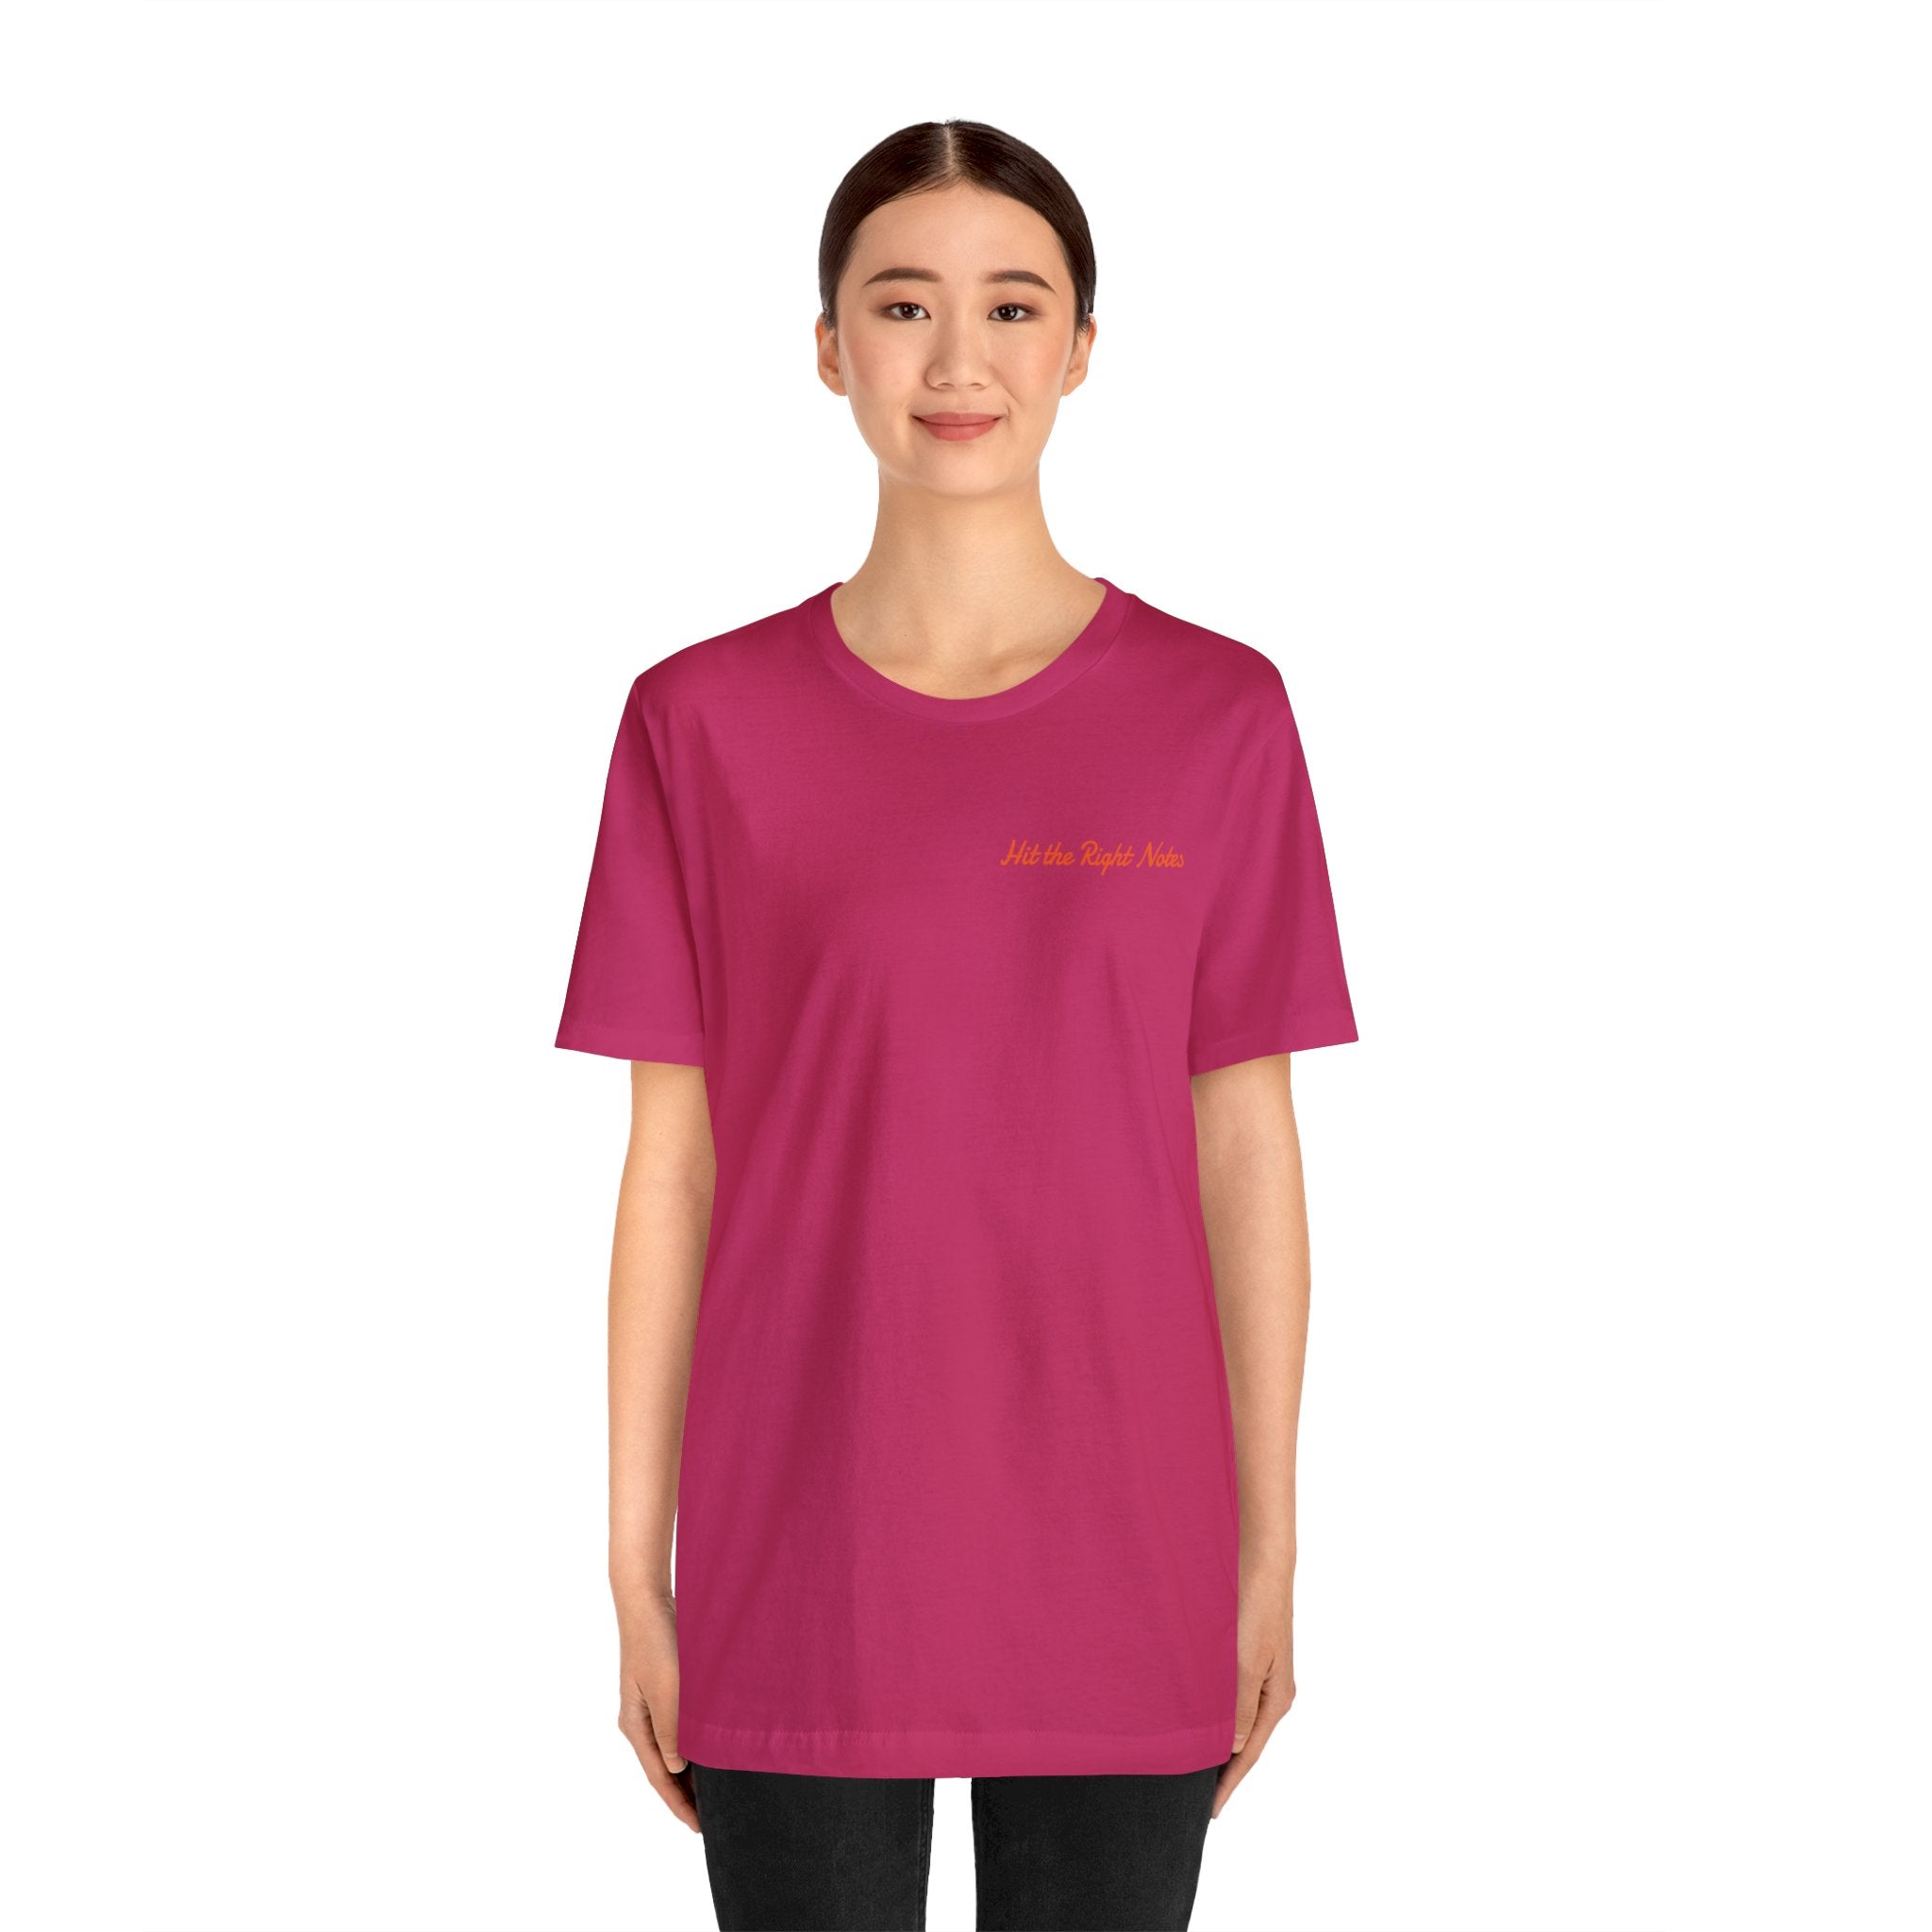 Hit the Right Notes Jersey Tee - Bella+Canvas 3001 Heather Mauve Classic Tee Comfortable Tee Cotton T-Shirt Graphic Tee JerseyTee Statement Shirt T-shirt Tee Unisex Apparel T-Shirt 6168948867790038187_2048 Printify